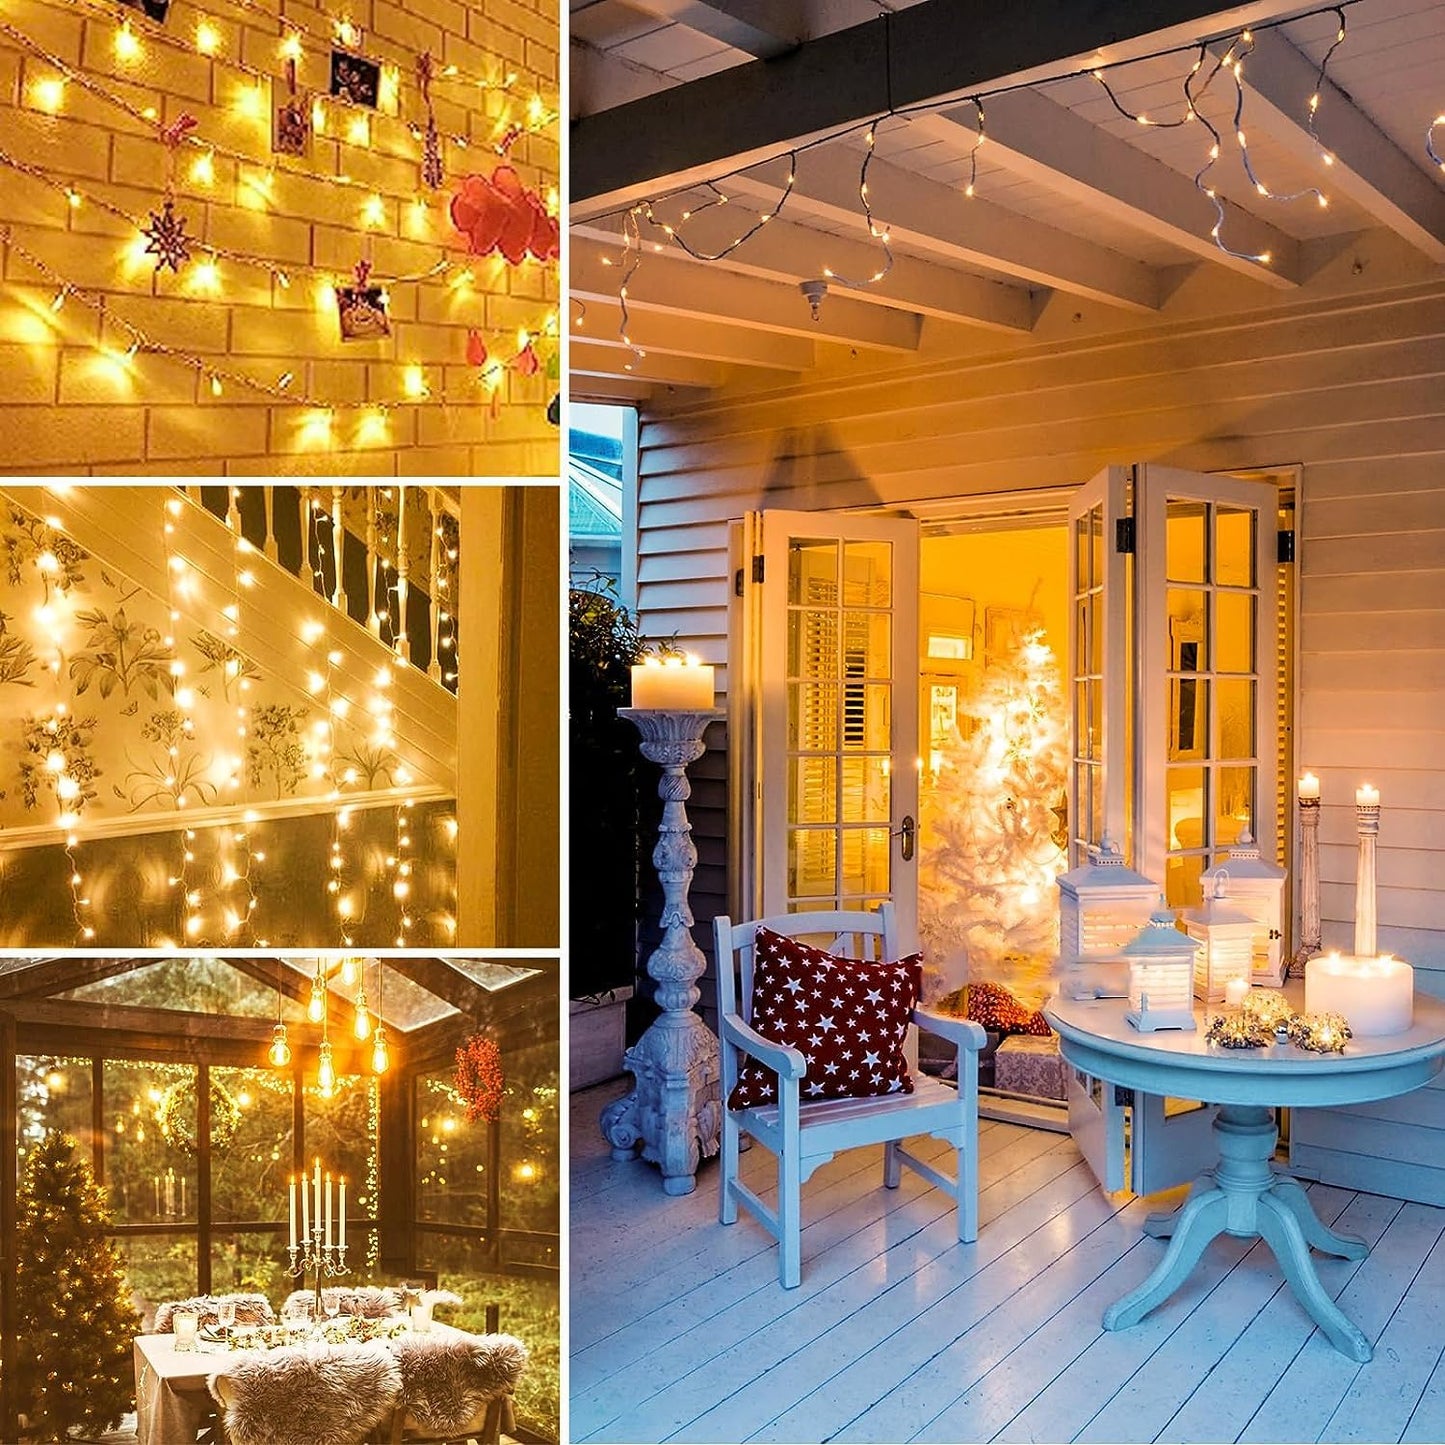 50 Meter still 250 LED String Lights for Home Decoration,Outdoor Indoor Waterproof Decoration Fairy Lights (warm wht)